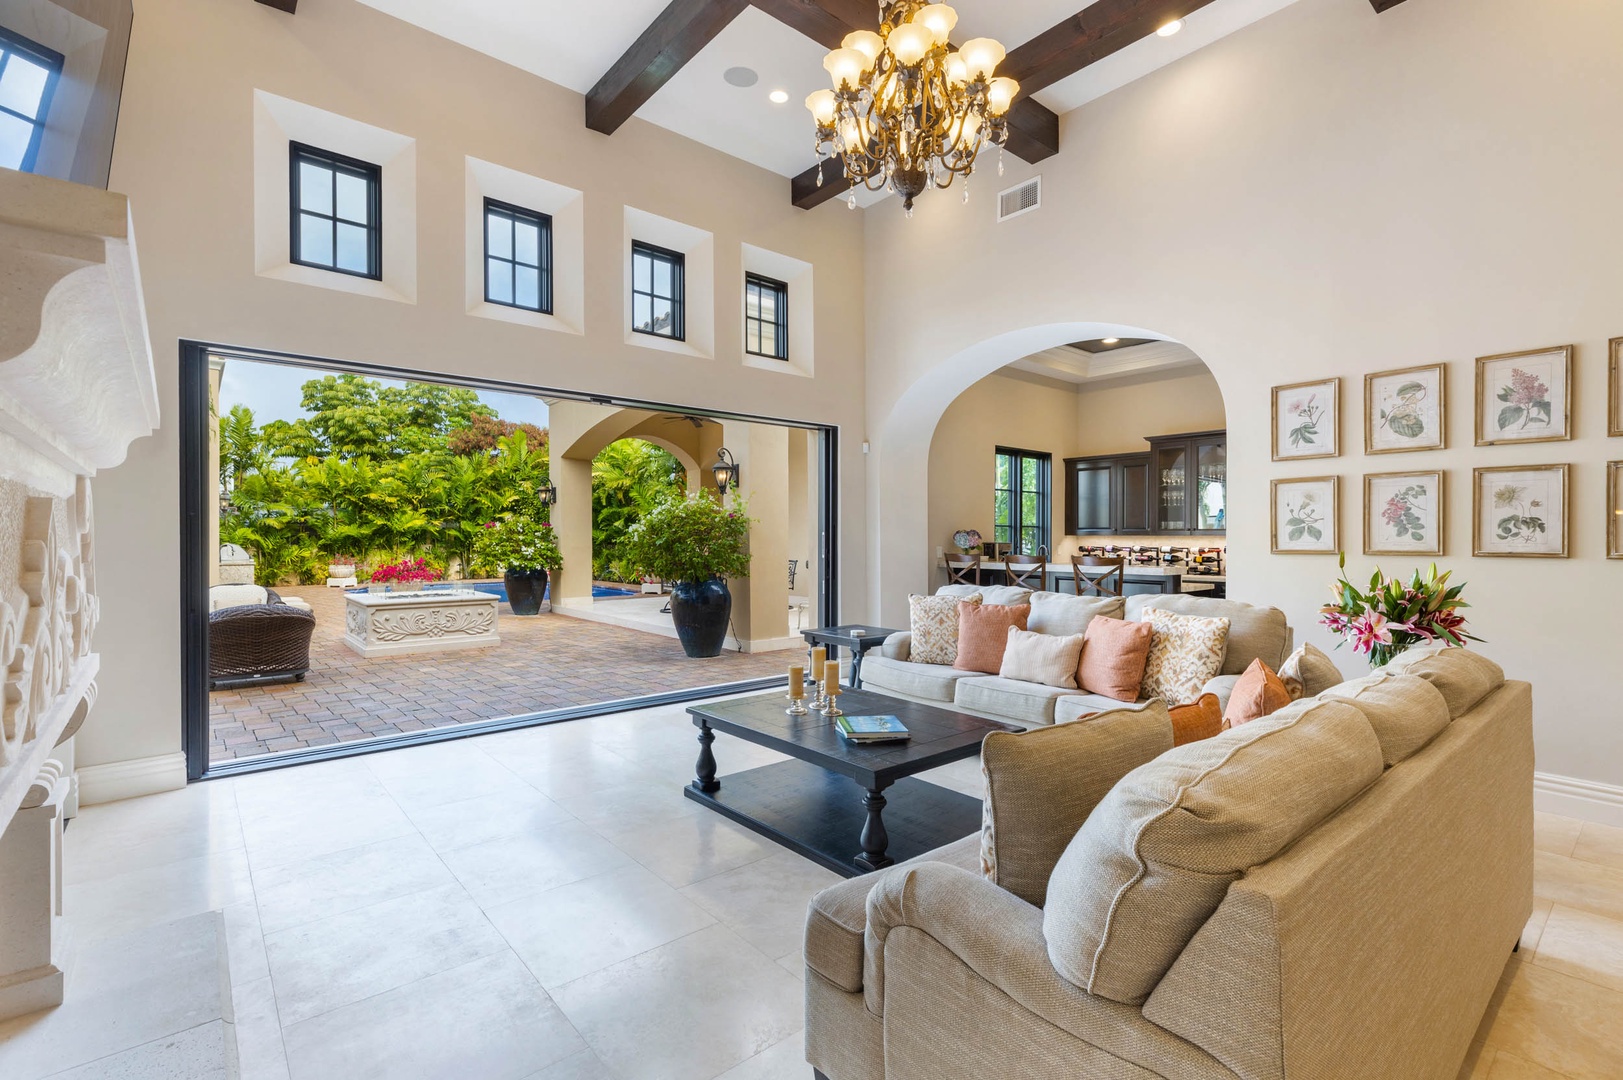 Honolulu Vacation Rentals, The Kahala Mansion - Elegant living space with high ceilings, plush seating, and natural light, brings the outside indoor.